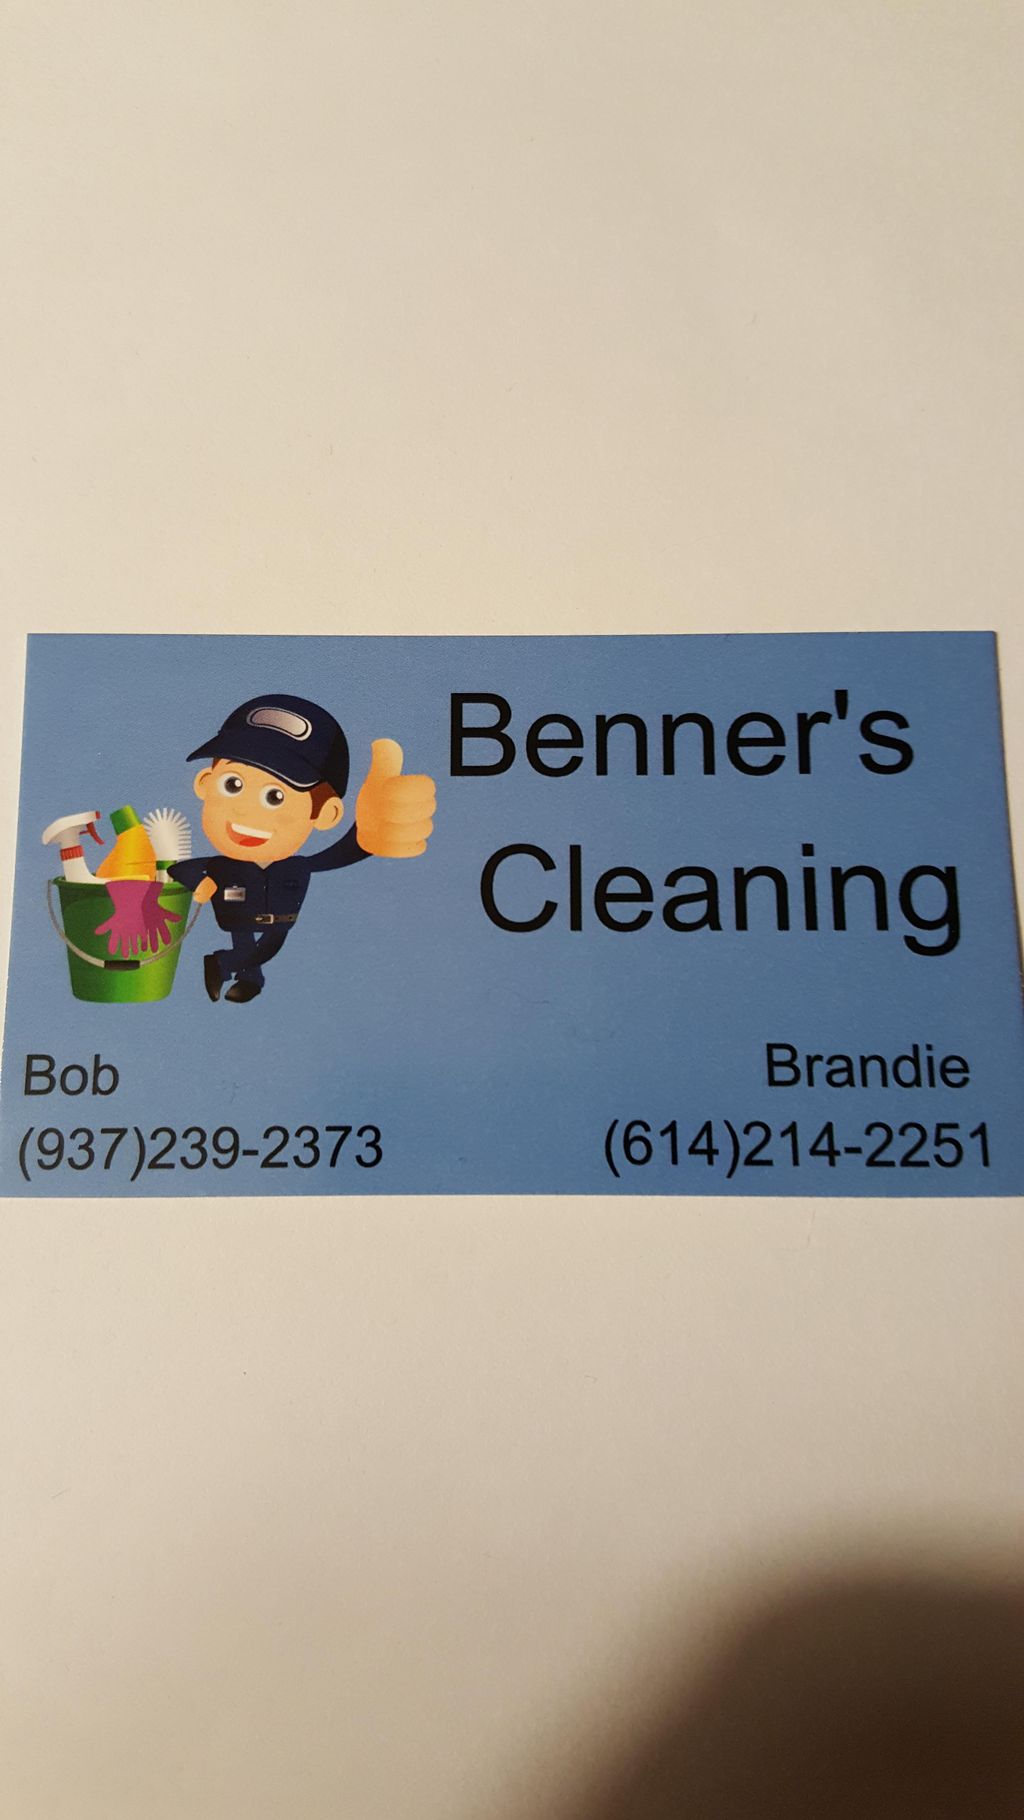 Benner's Cleaning